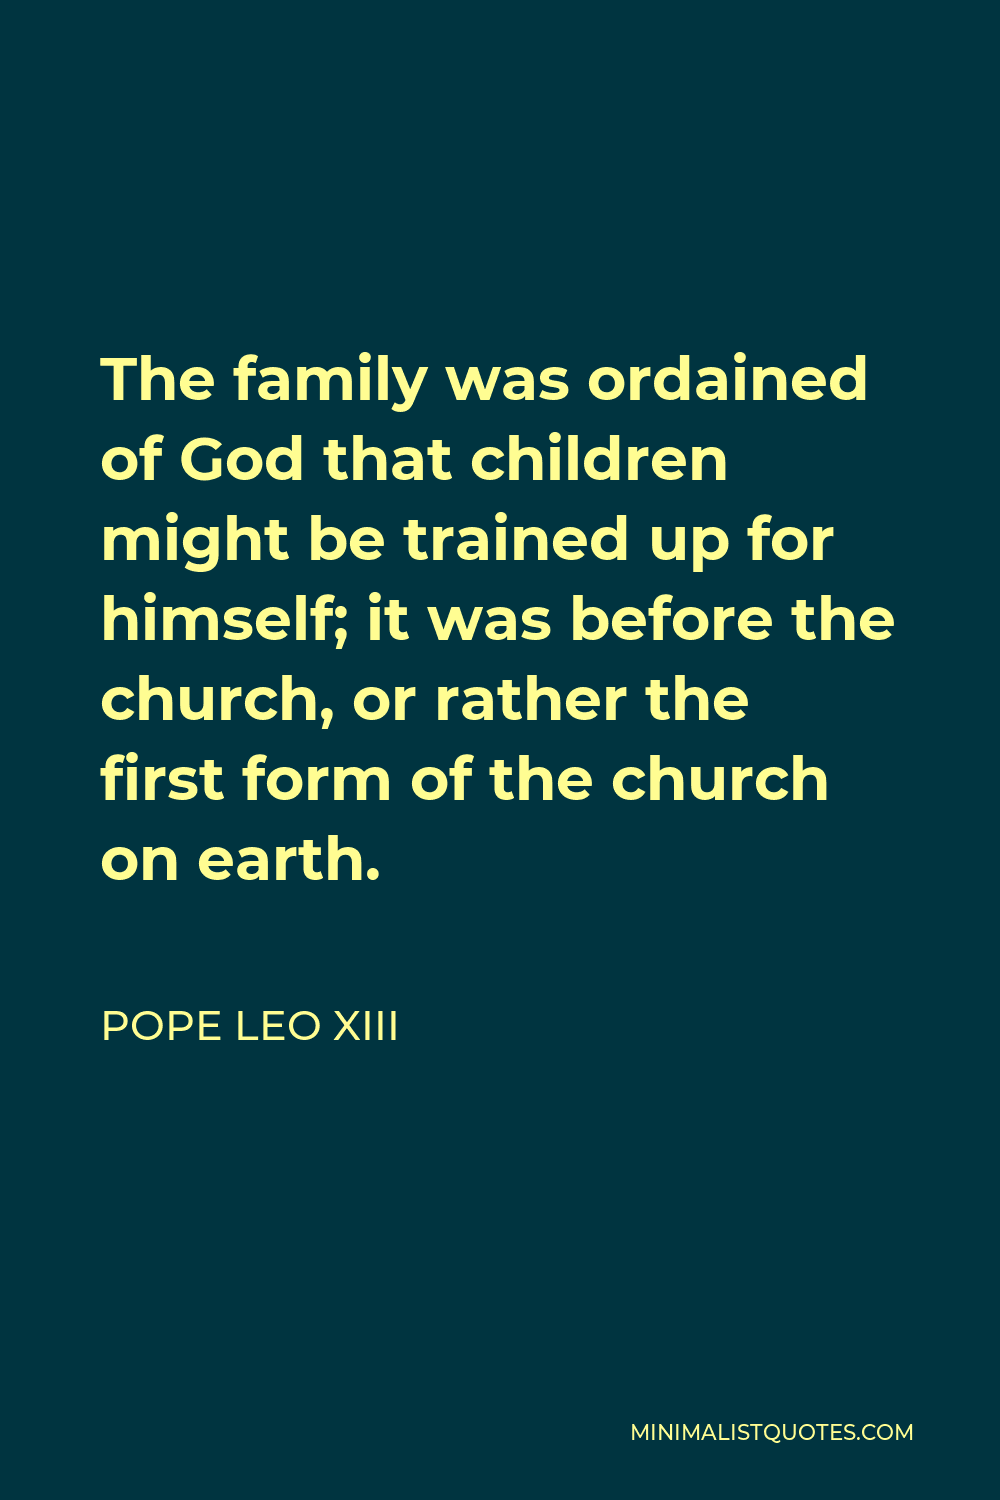 Pope Leo XIII Quote - The family was ordained of God that children might be trained up for himself; it was before the church, or rather the first form of the church on earth.